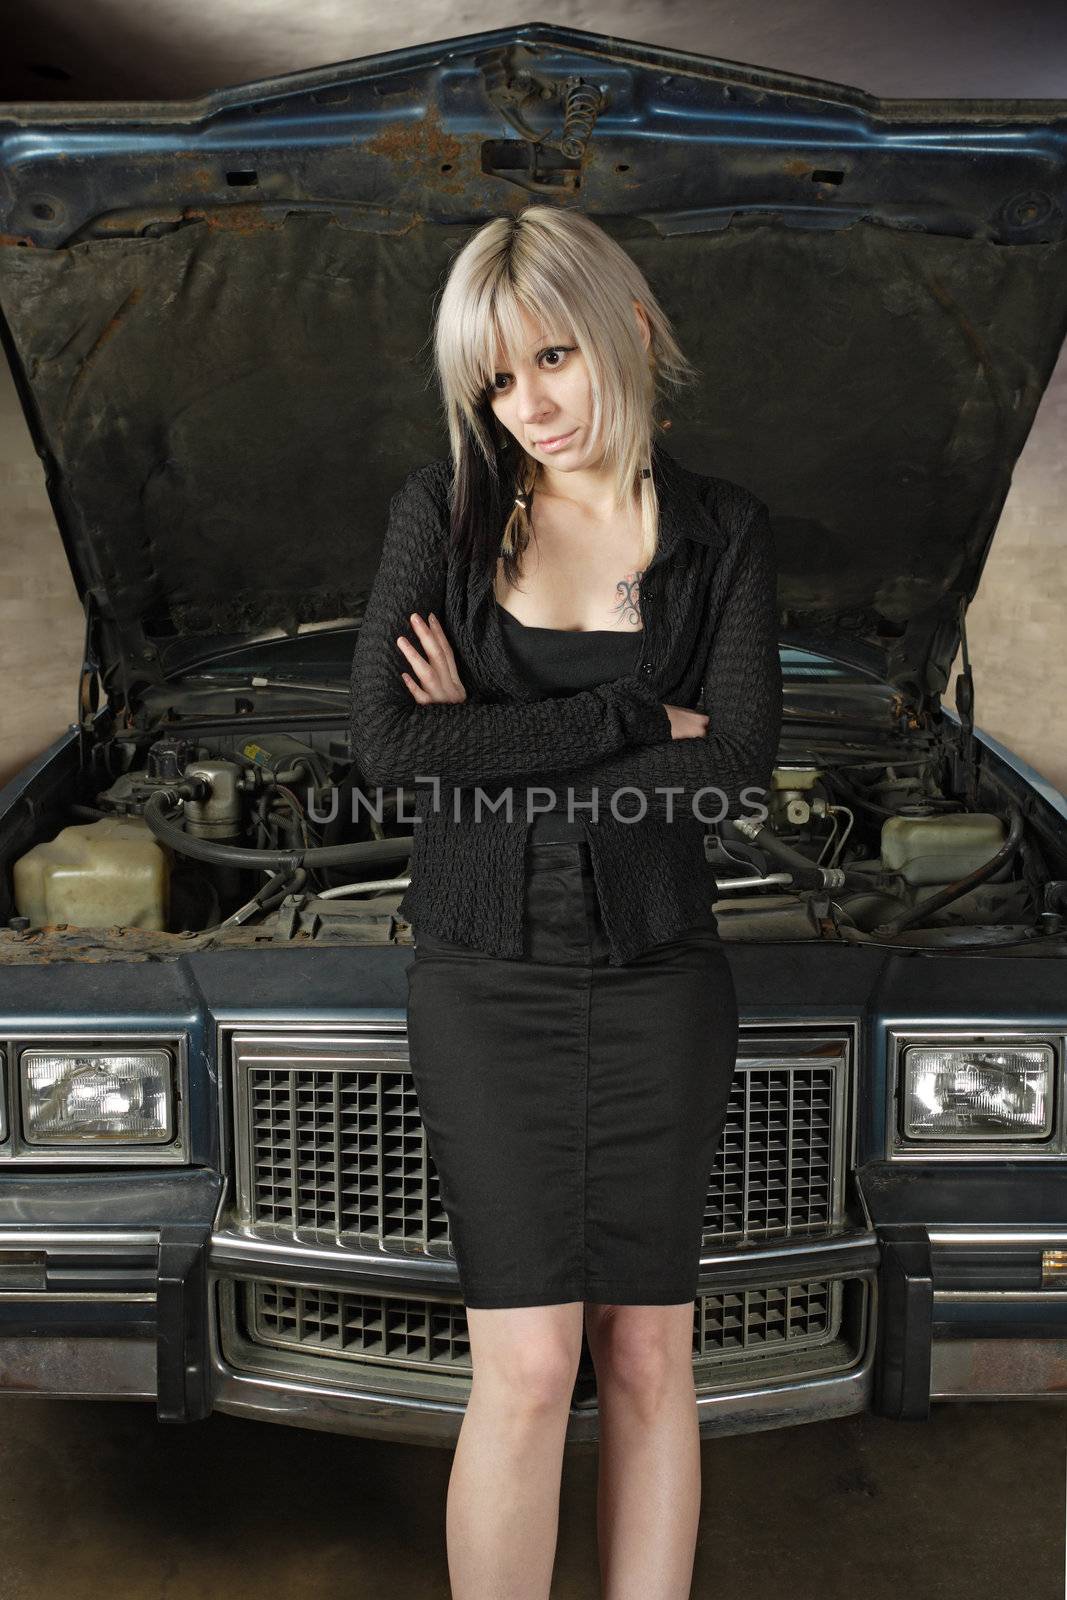 A frustrated blond female in her 30's waiting for a mechanic to fix her car.
